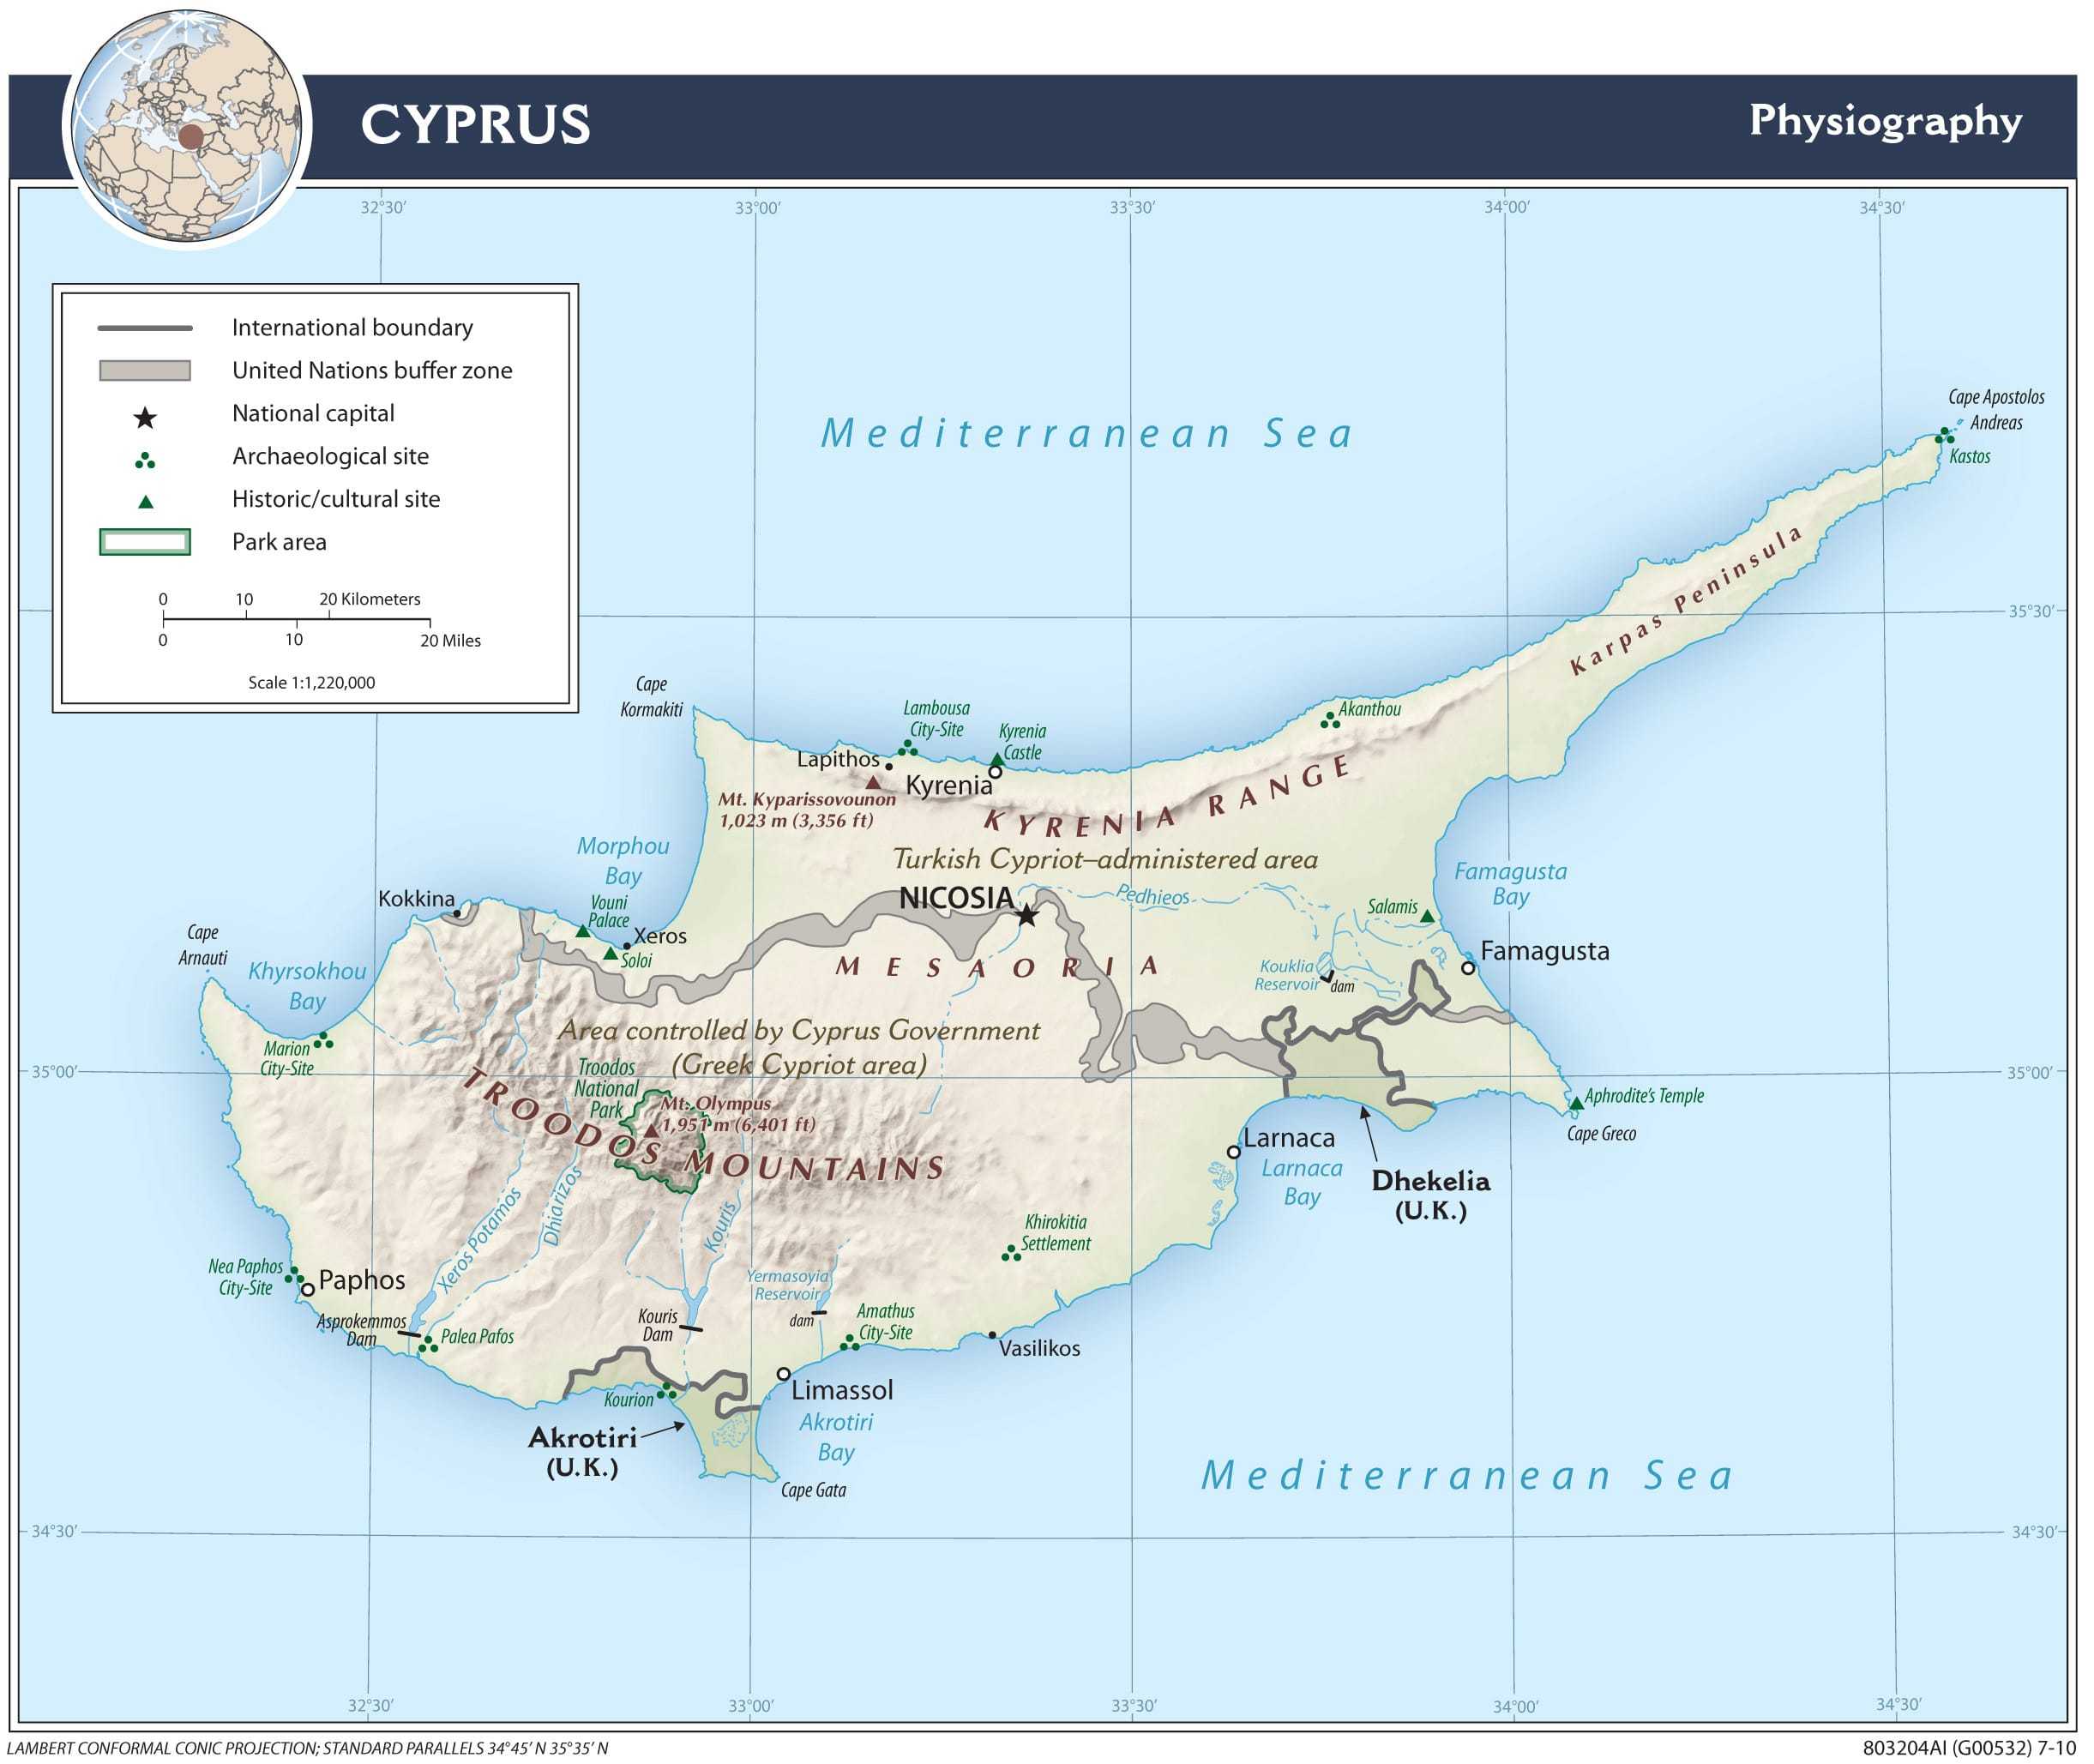 Physiographical map of Cyprus.